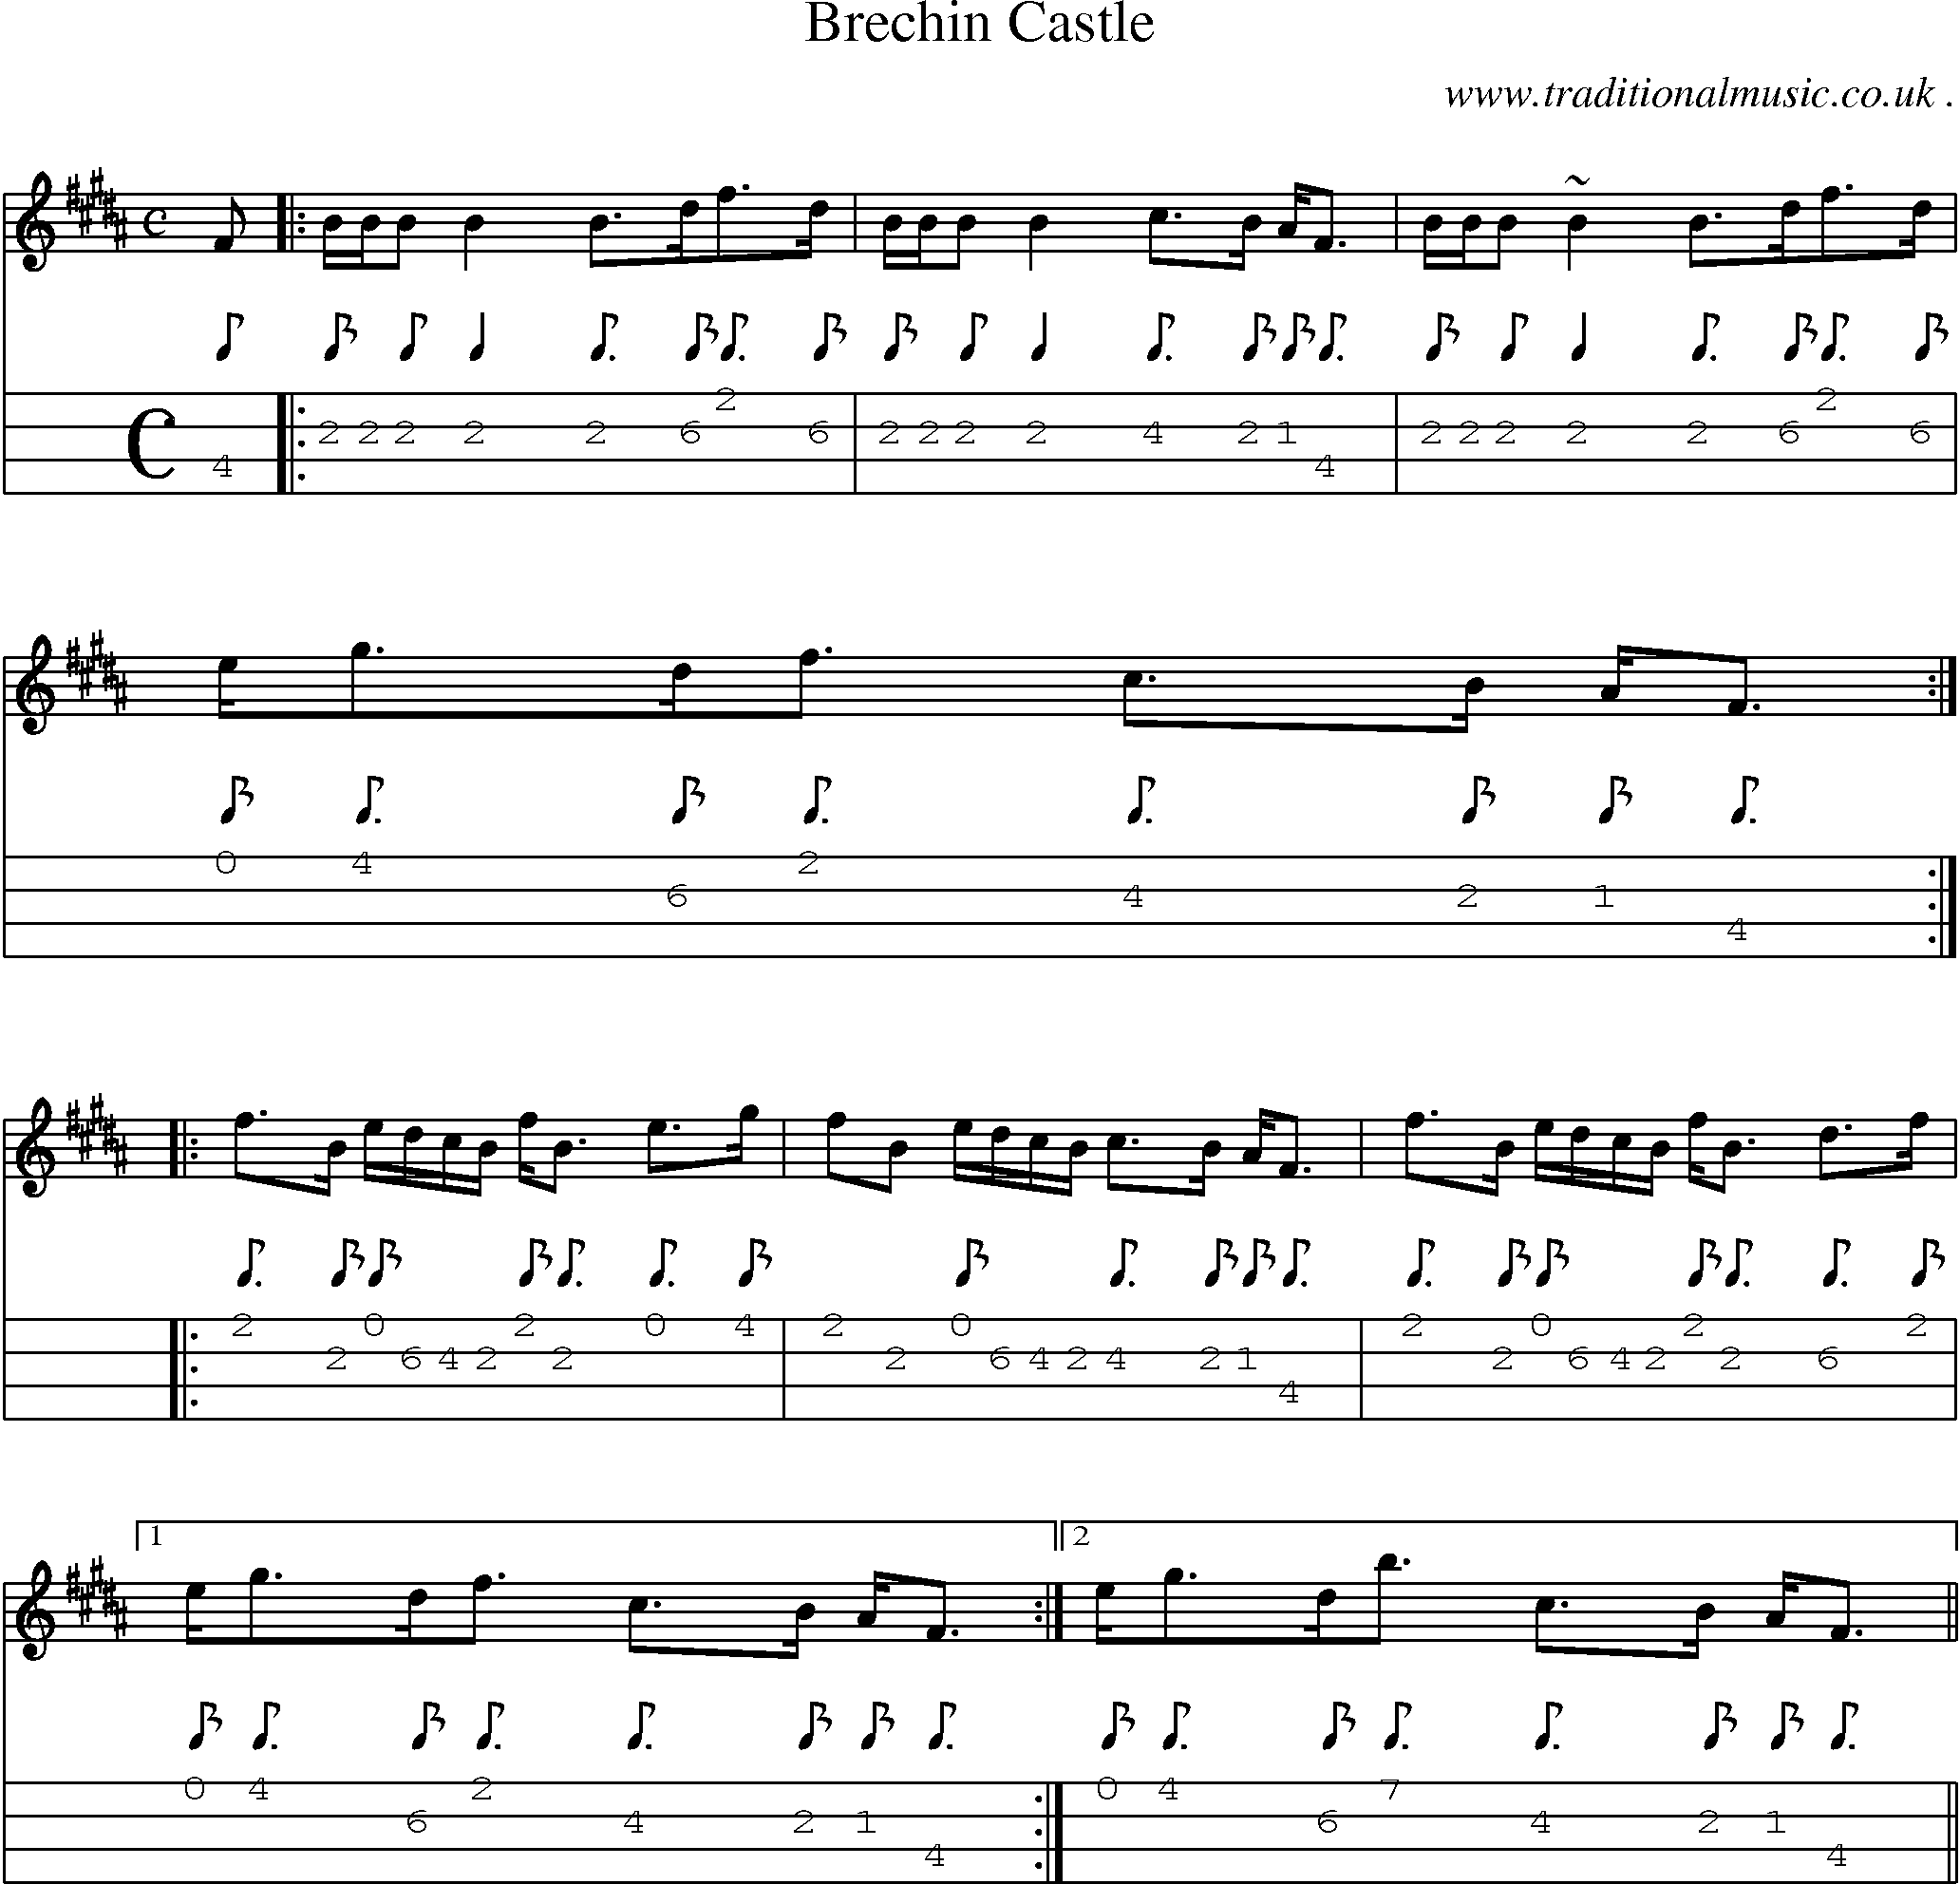 Sheet-music  score, Chords and Mandolin Tabs for Brechin Castle